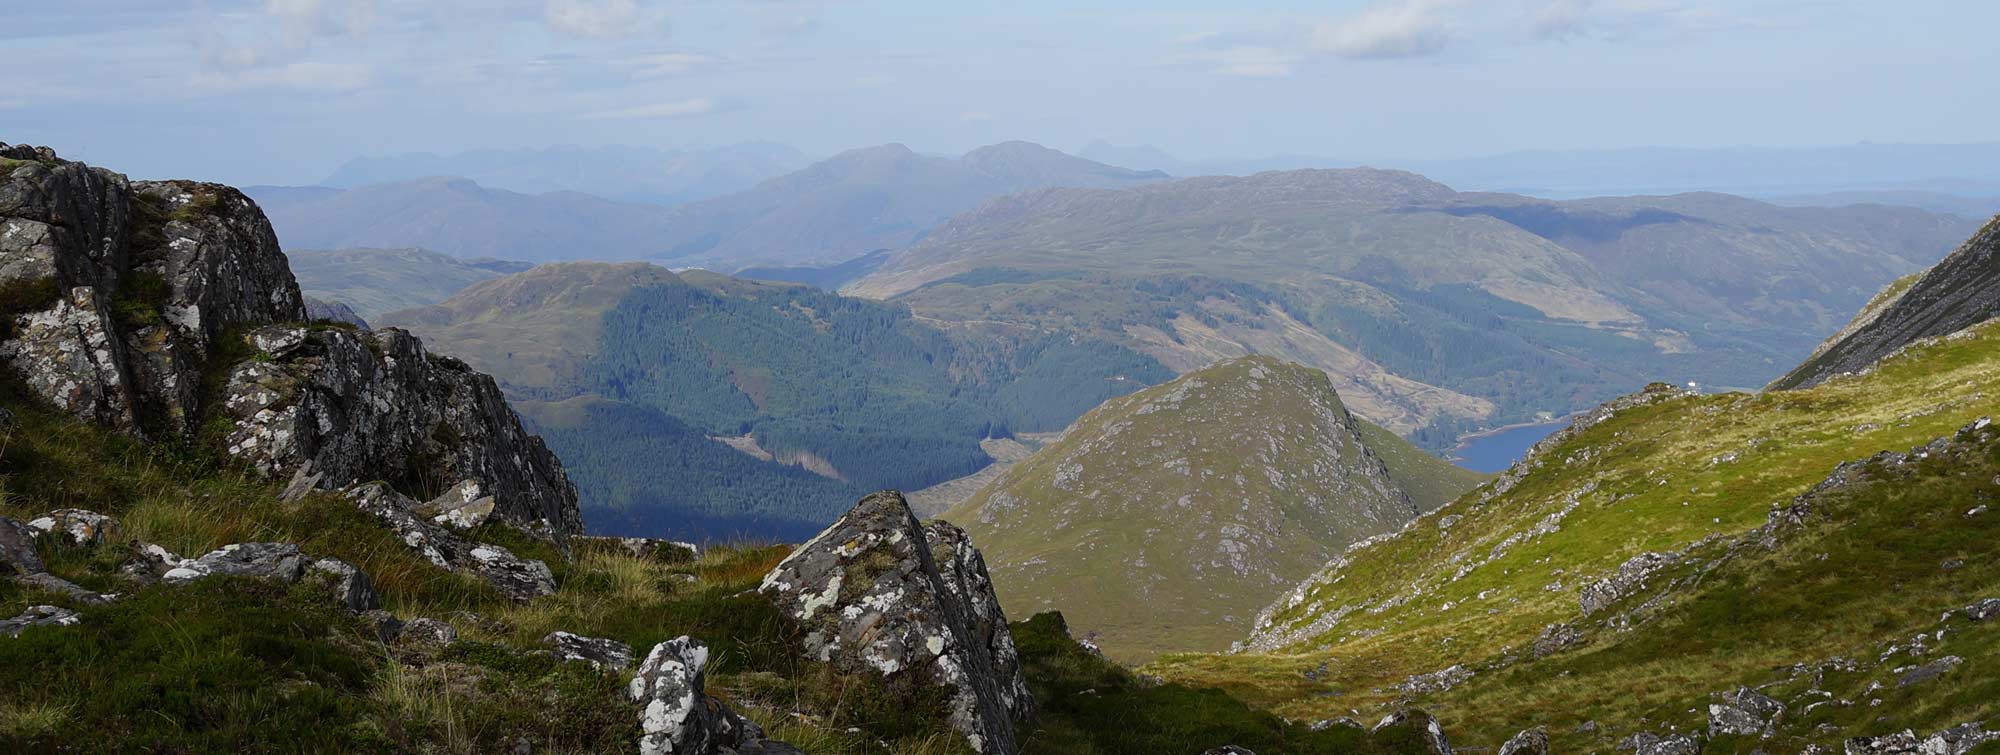 Glen Shiel Round and the Five Sisters of Kintail